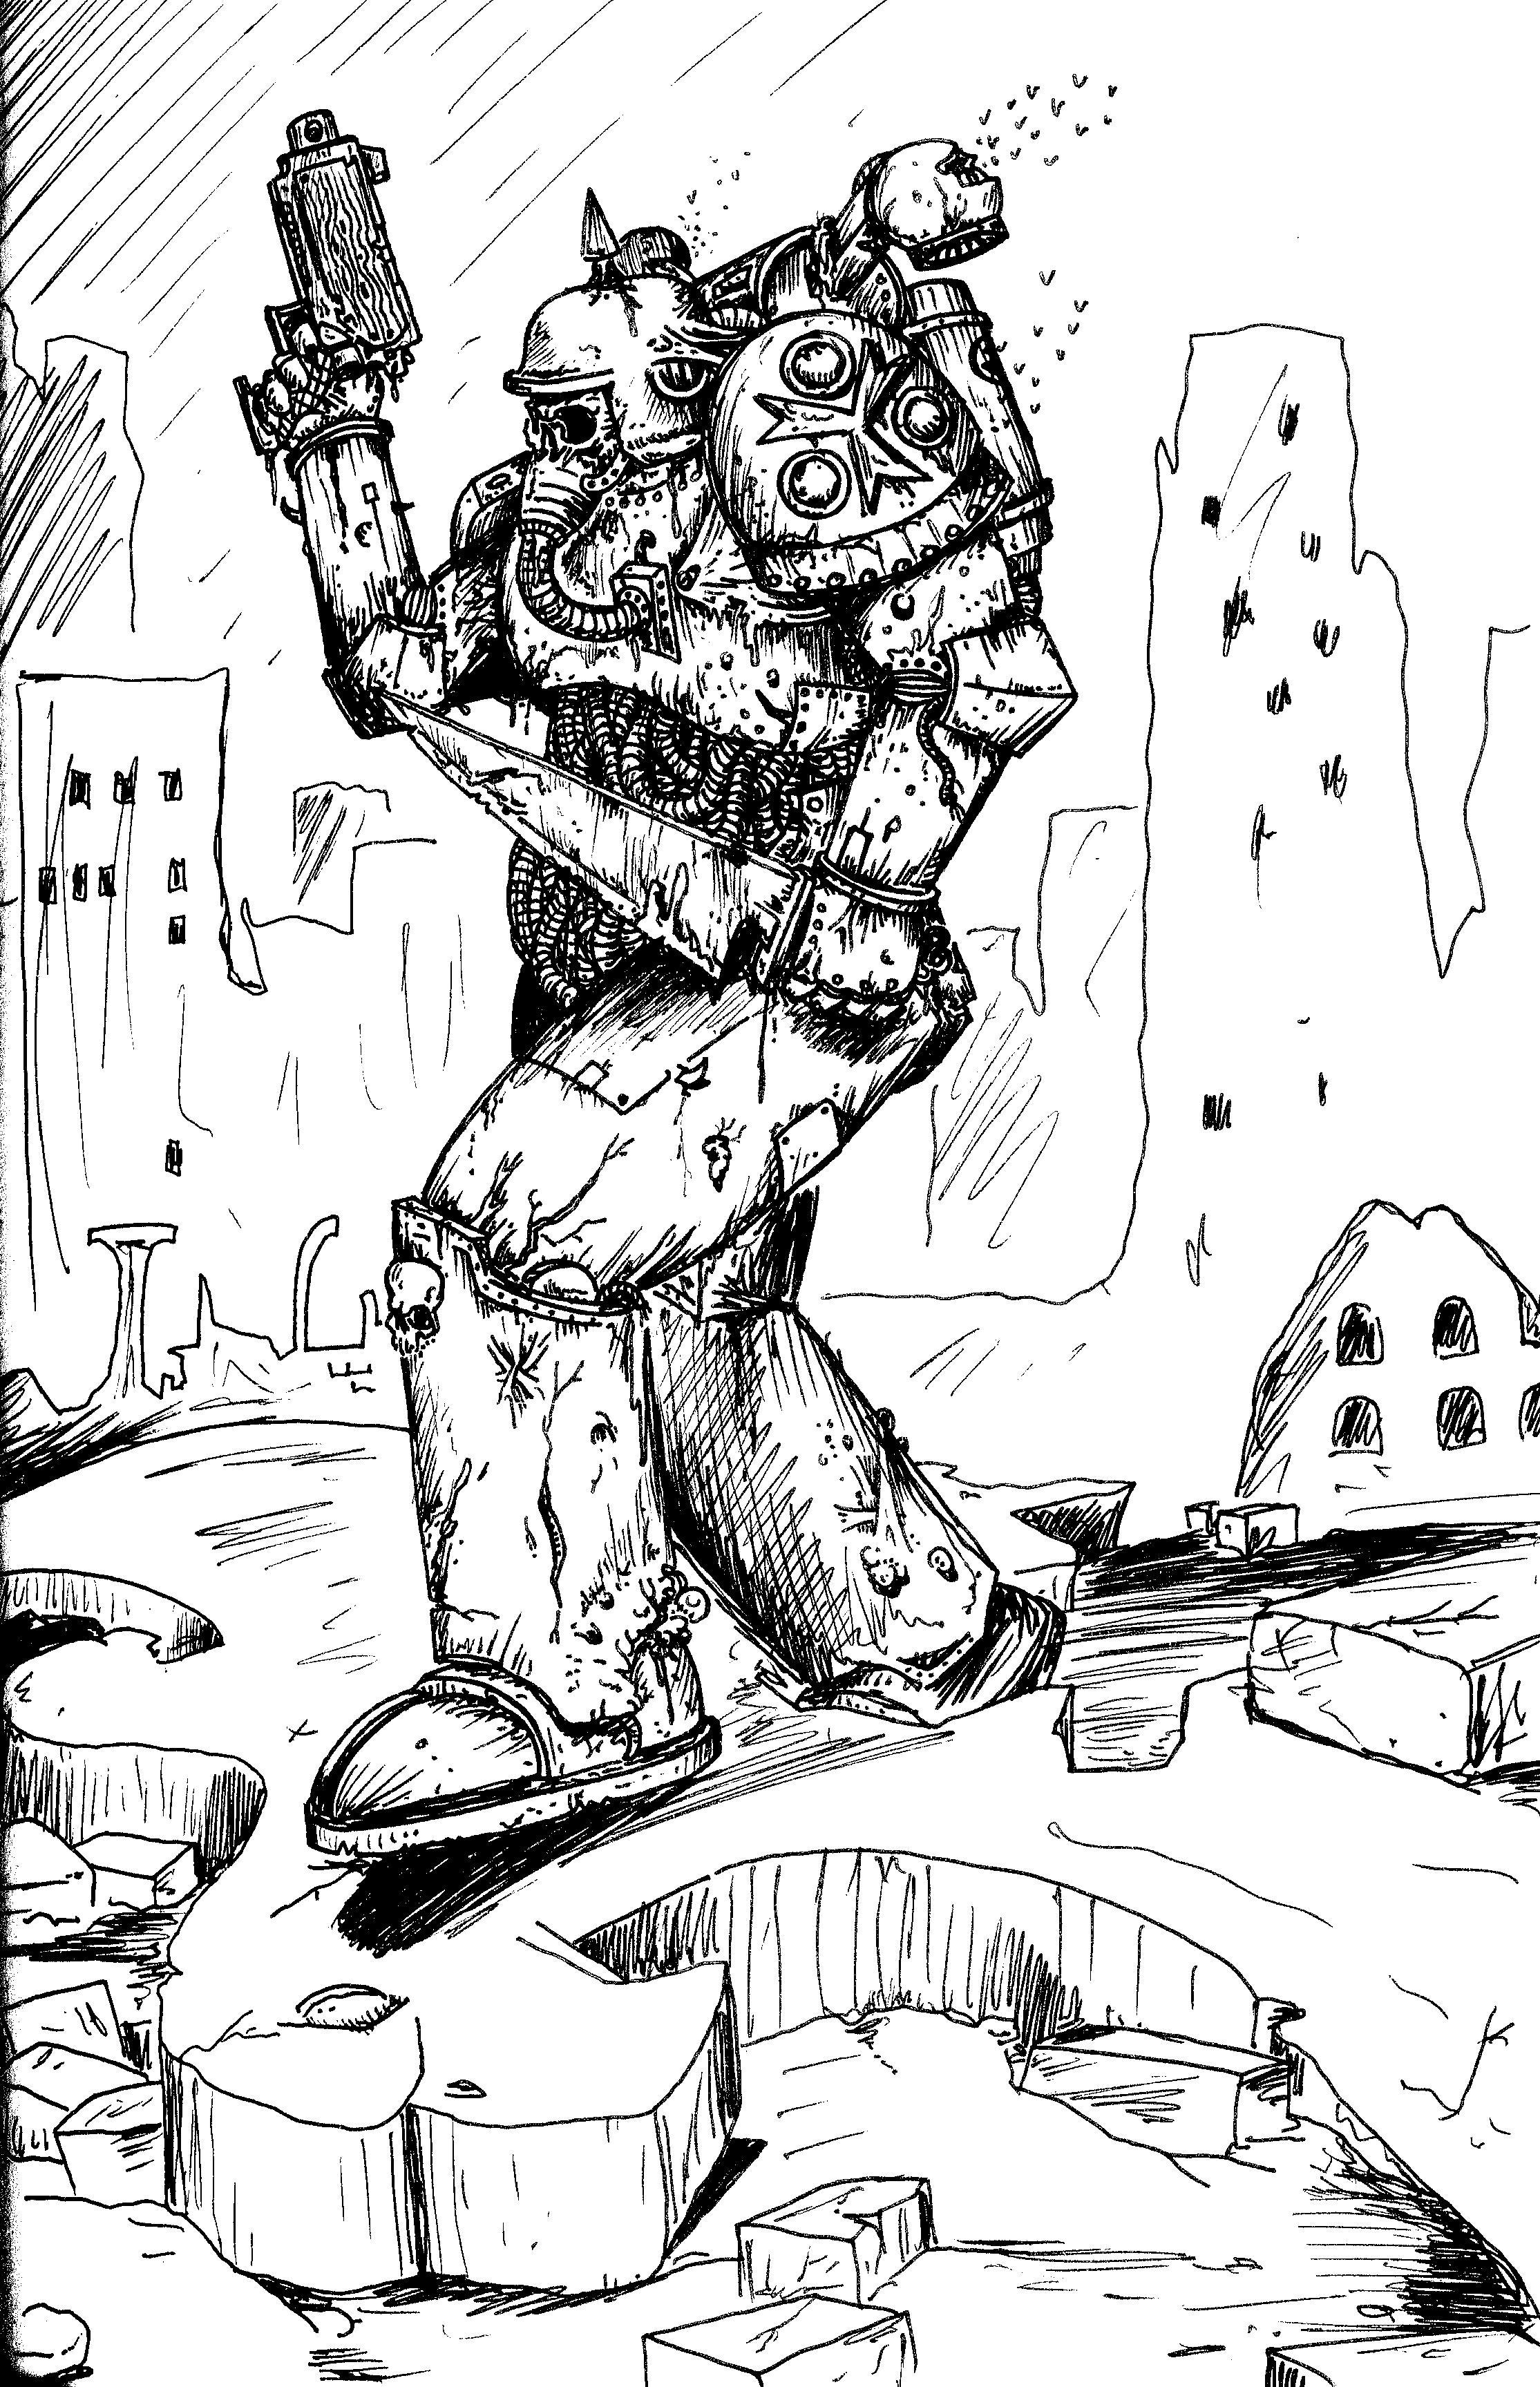 80´s, Artwork, Burning City, Chaos, Chaos Space Marines, Conversion, Daemons, Dead, Down, Drawing, Drawings, First Edition, Flys, Nurgle, Old, Old Style, School, Space Marines, Style, Ugly